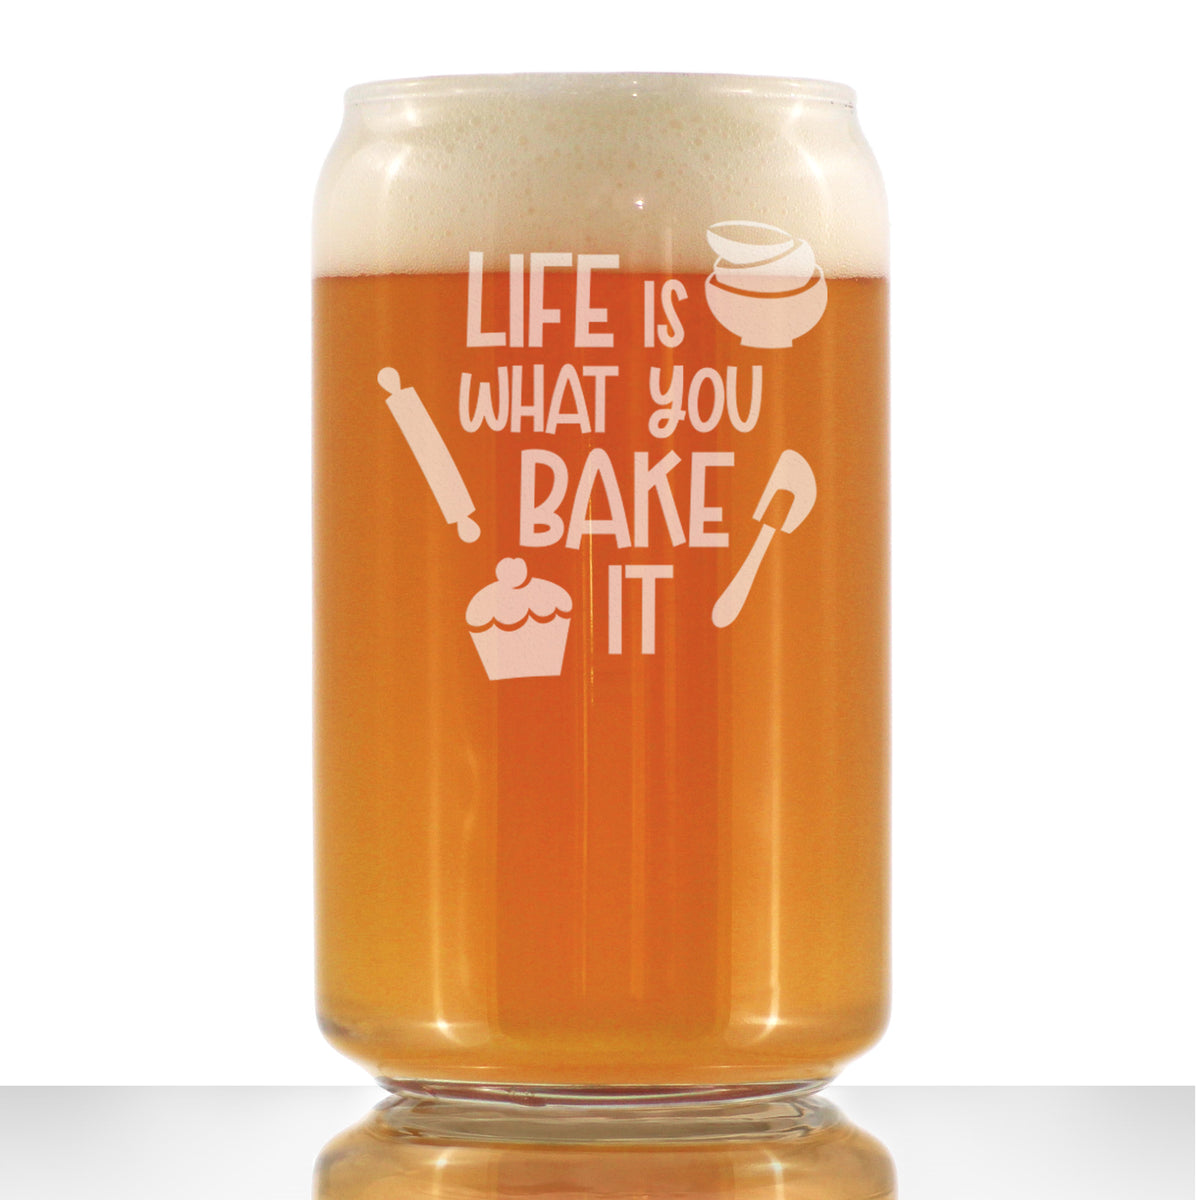 Life Is What You Bake It - Beer Can Pint Glass - Funny Baking Themed Decor and Gifts for Bakers - 16 oz Glasses